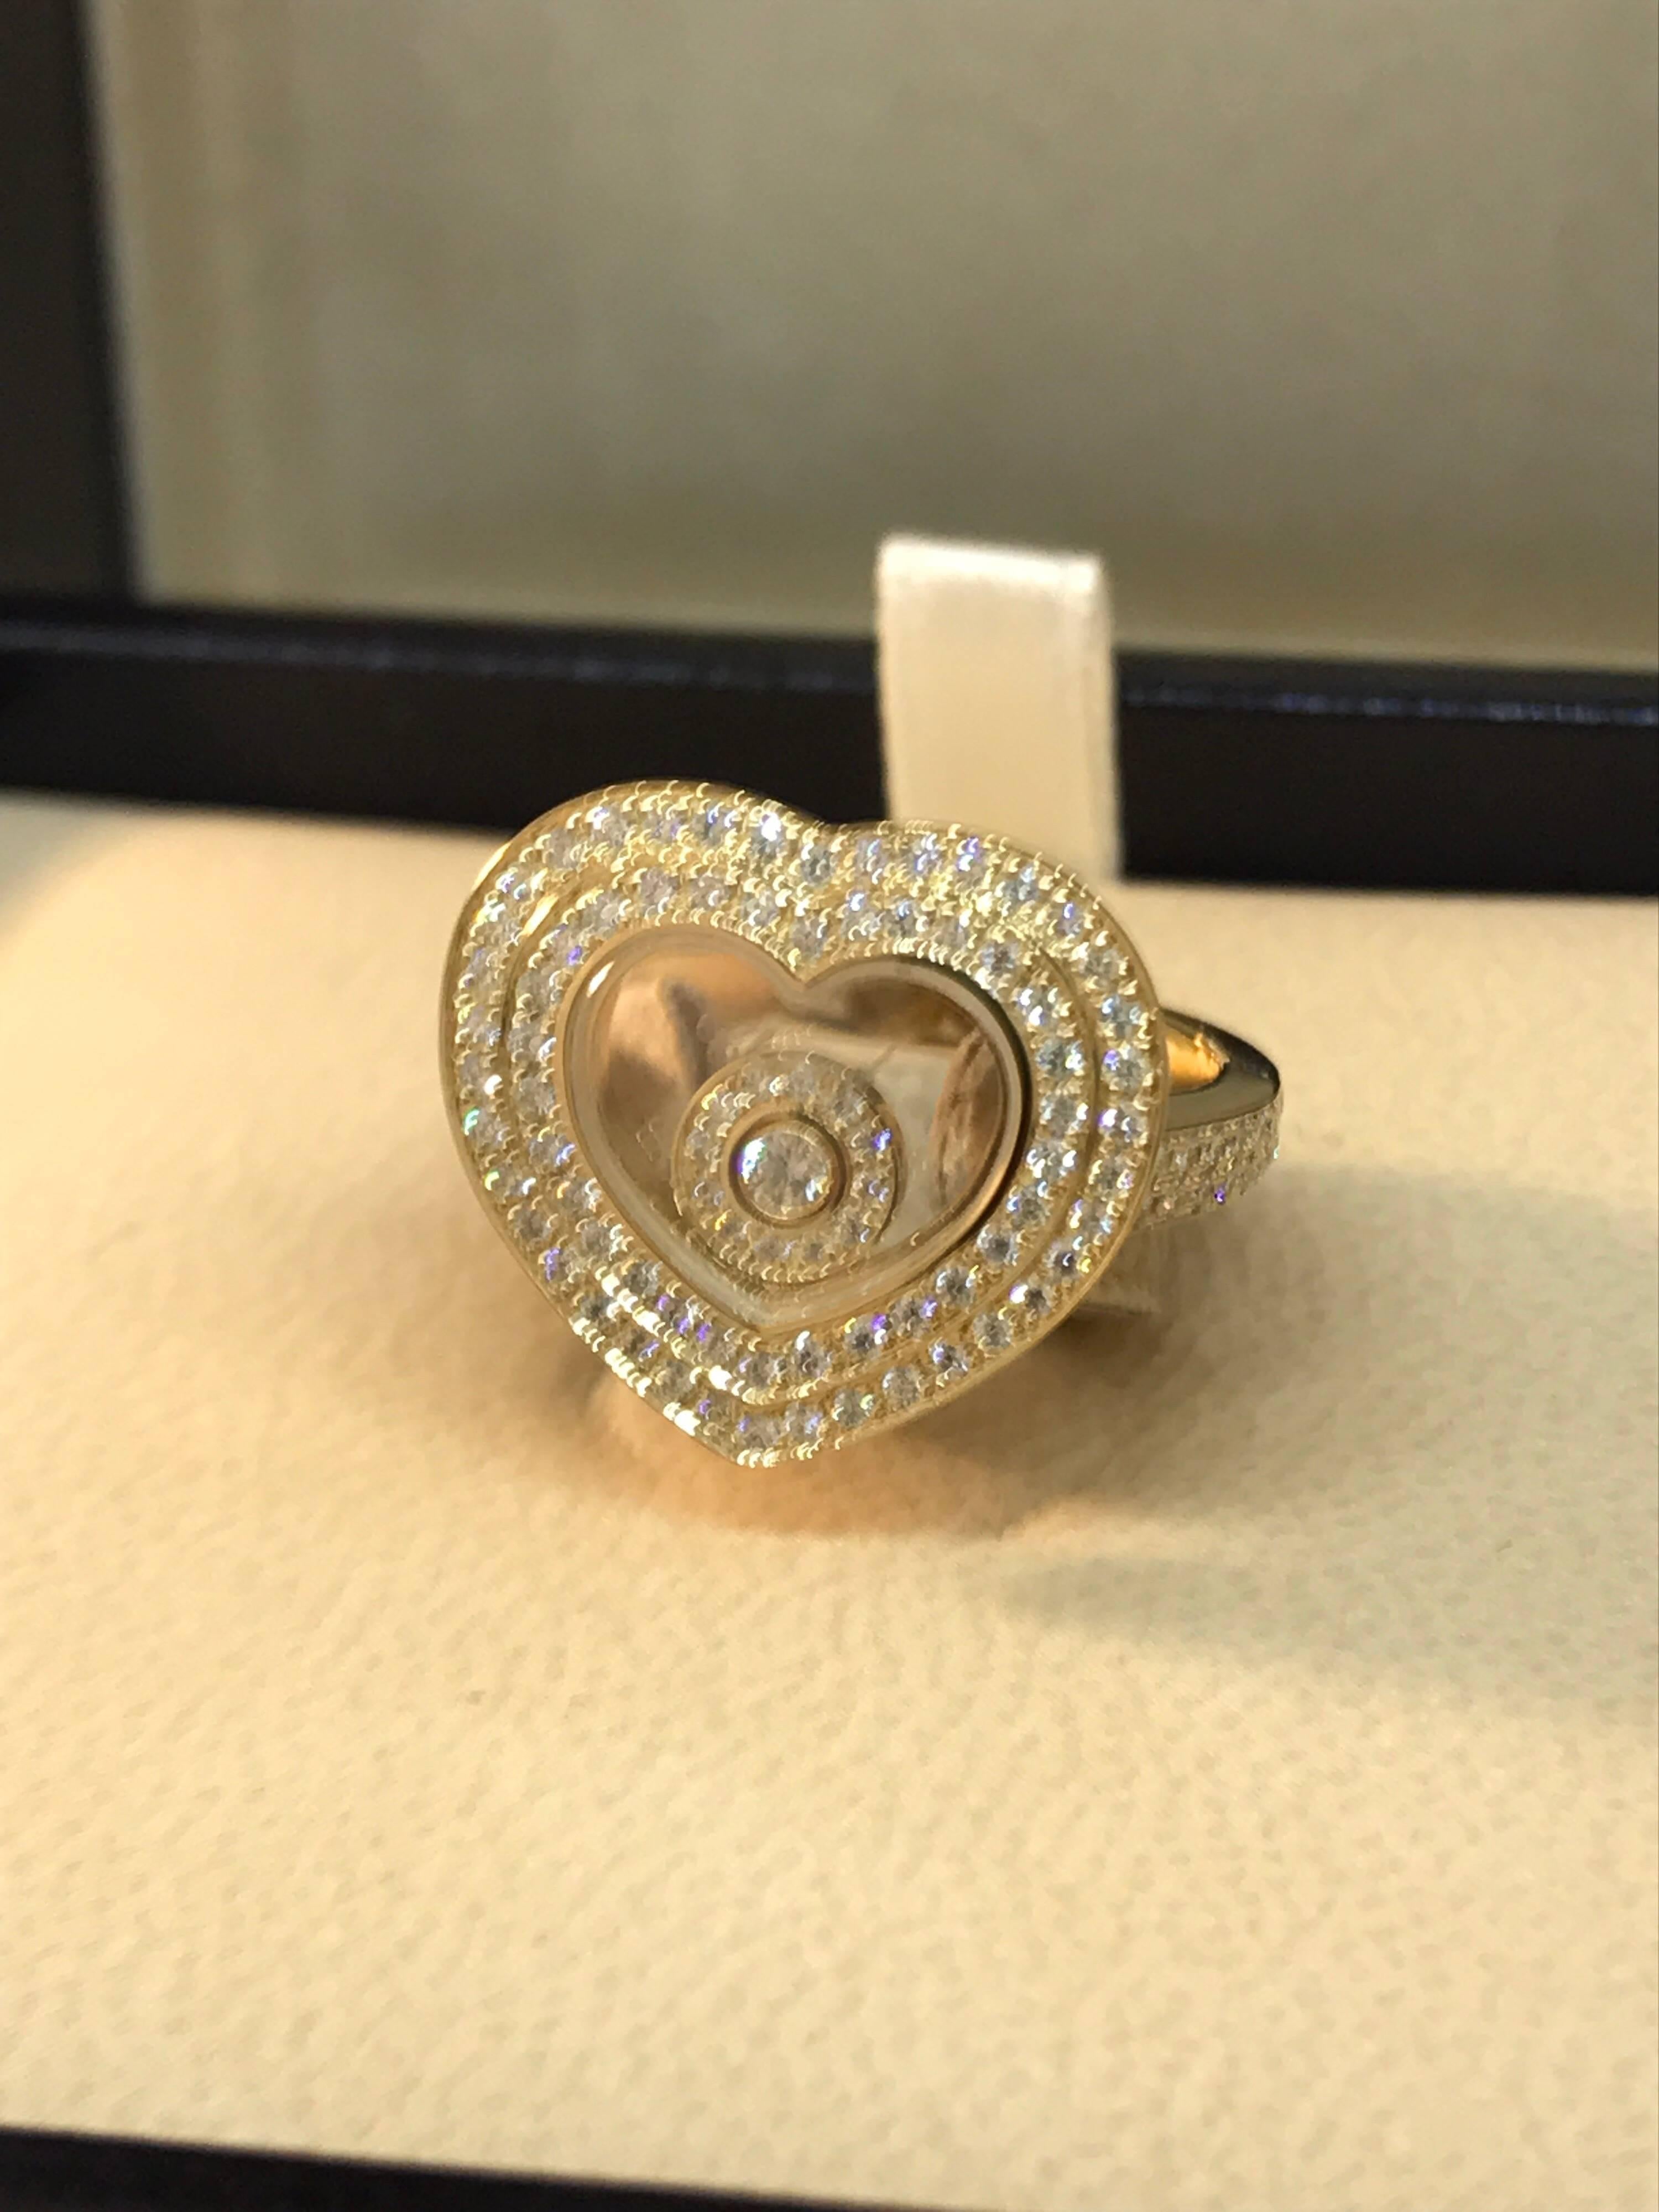 Chopard Happy Diamonds Heart Shaped Ring

Model Number: 82/7206-0109

100% Authentic

Brand New

Comes with original Chopard box, certificate of authenticity and warranty, and jewels manual

18 Karat Yellow Gold (11.20gr)

112 Diamonds on the ring